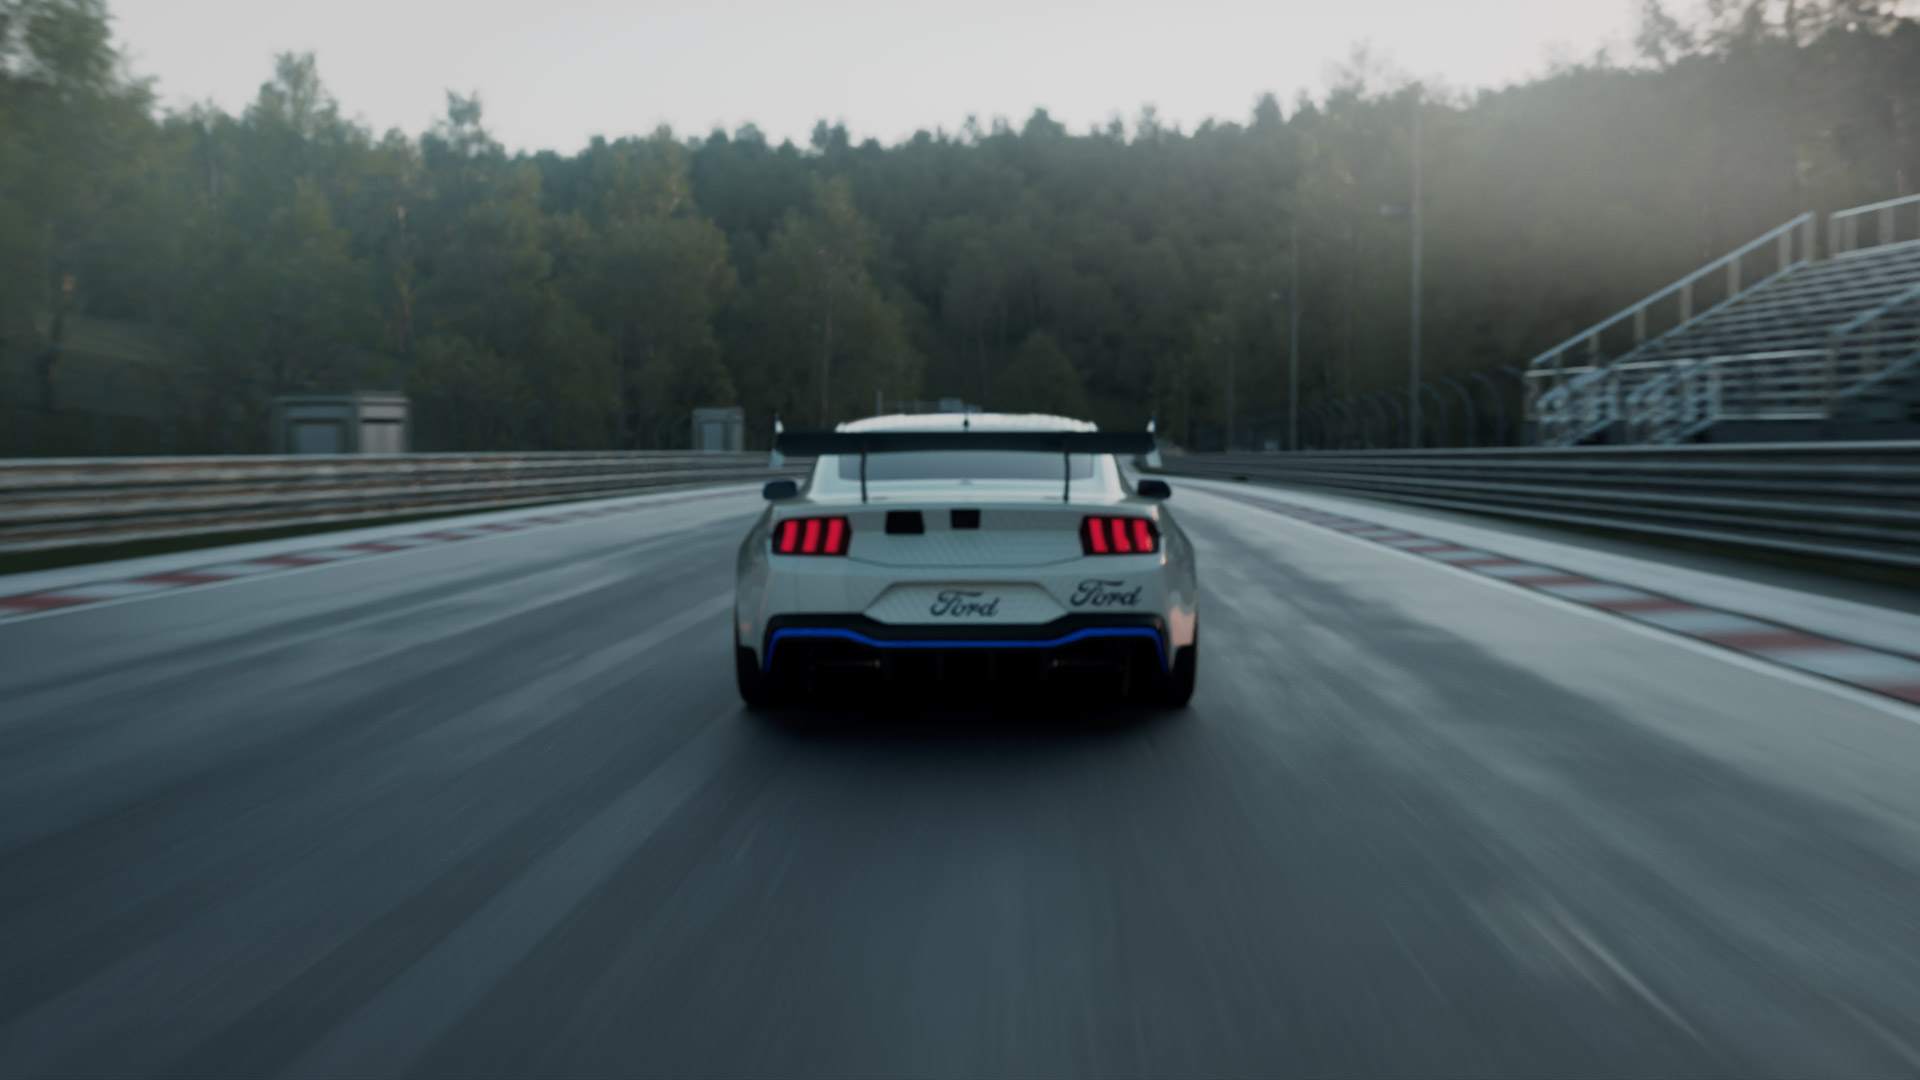 S650 Mustang Ford Debuts Next-Gen Mustang GT3, GT4, Supercars and Factory X Race Cars Mustang Supercars Championship 05